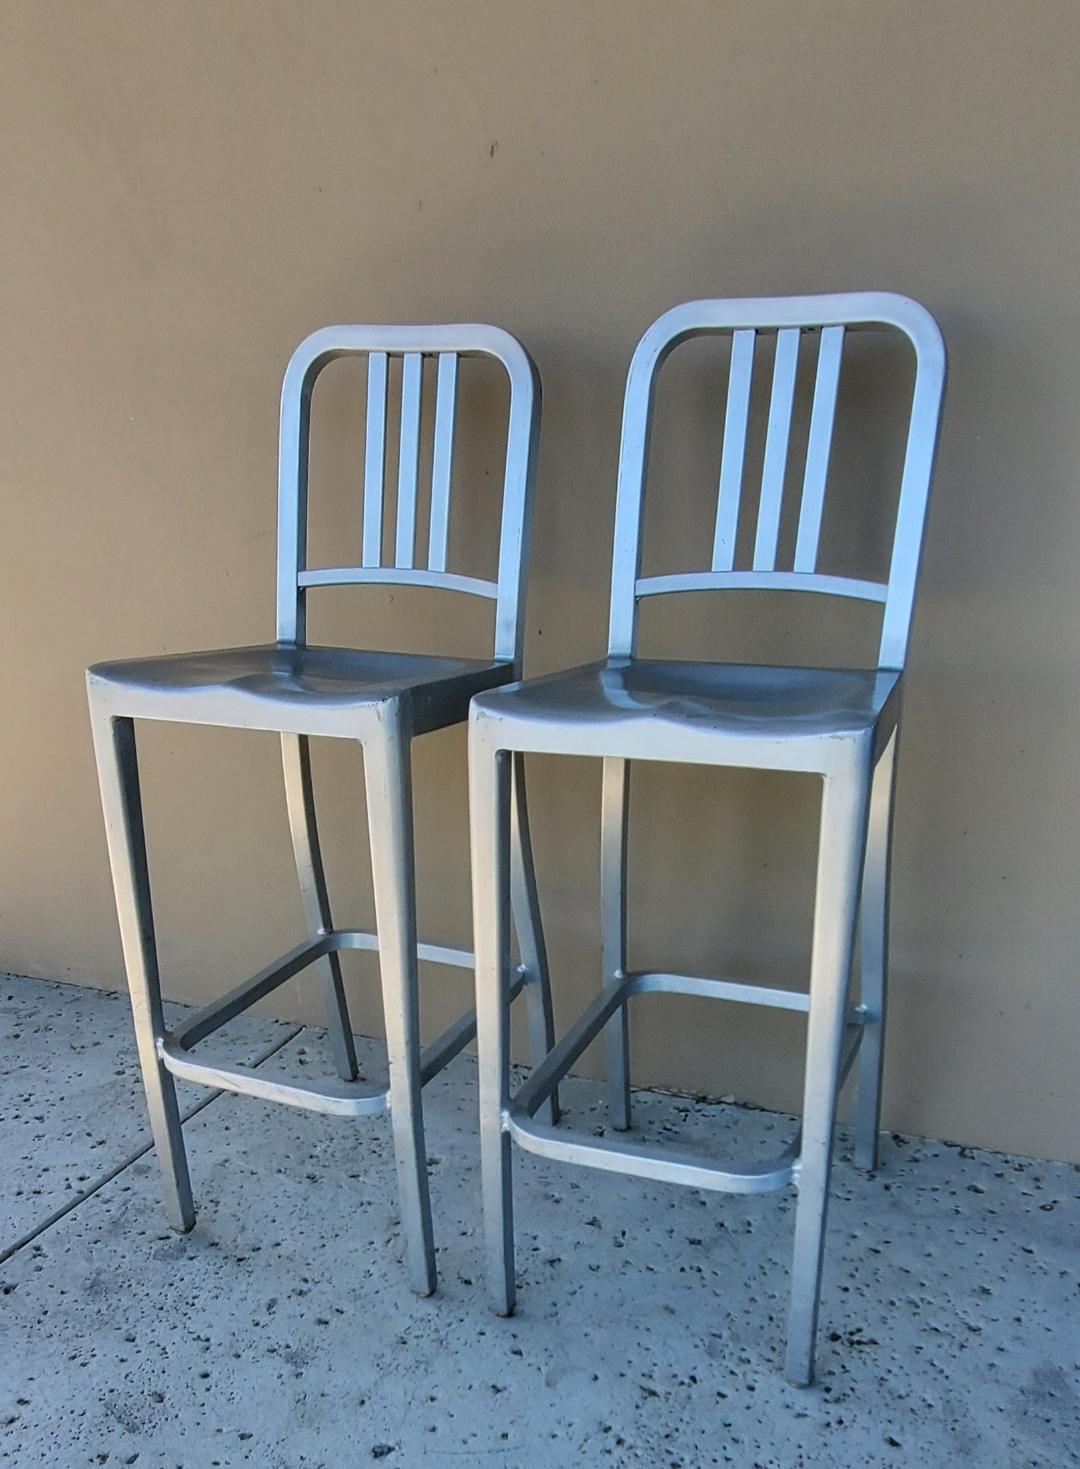 2 Tall Brushed Aluminum Indoor Outdoor EMECO Bar Stools, Labeled.

These Sturdy Brushed Aluminum EMECO Indoor Outdoor Bar Stools Are Very Comfortable With The Three Vertical Slat Back With Brushed Aluminum Footrest Ring.

Each Stool Has Some